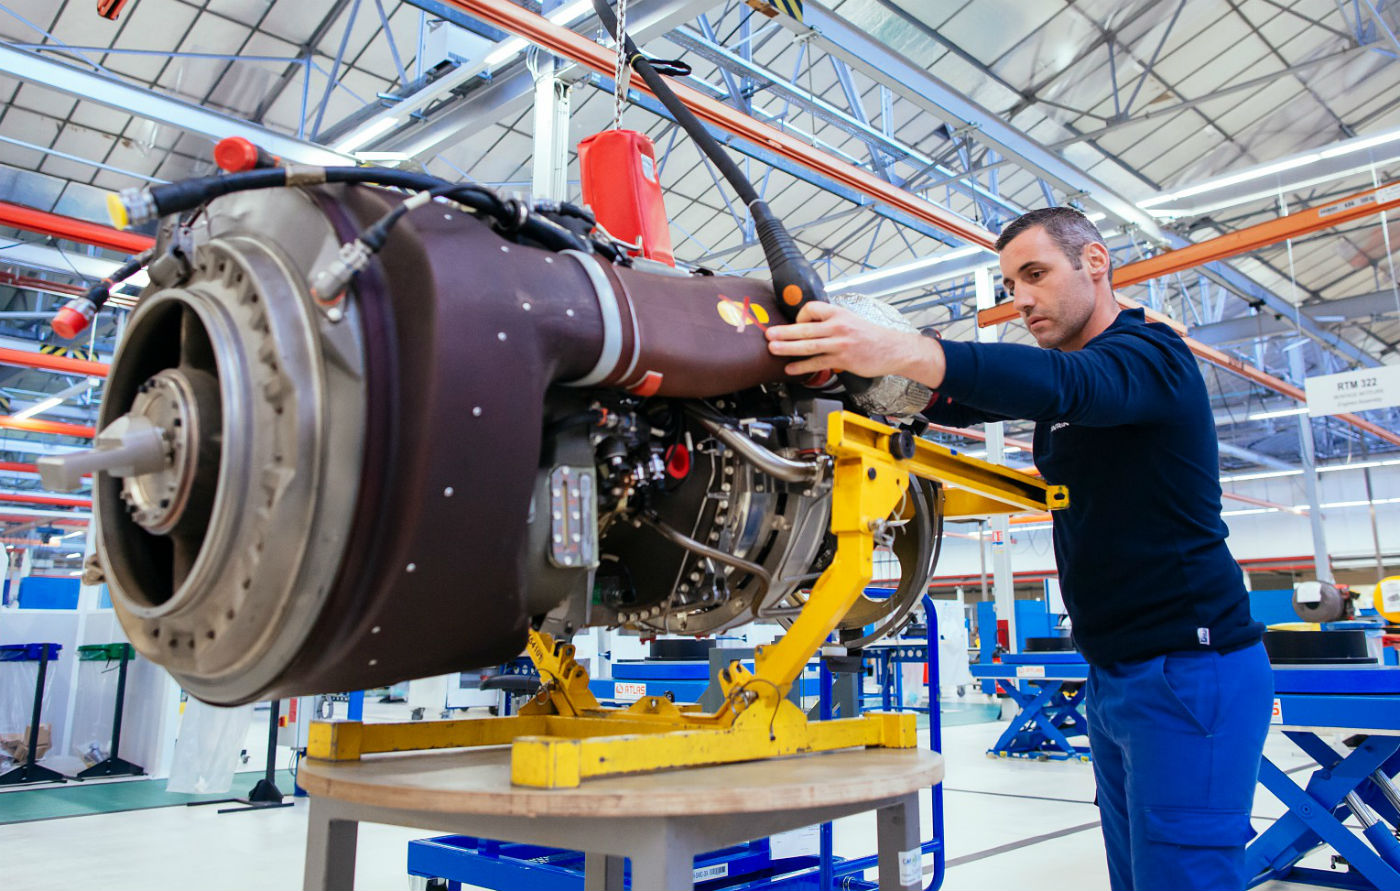 This contract will provide maintenance, repair and overhaul for this engine fleet and will be managed by Safran Helicopter Engines Germany. Safran Photo